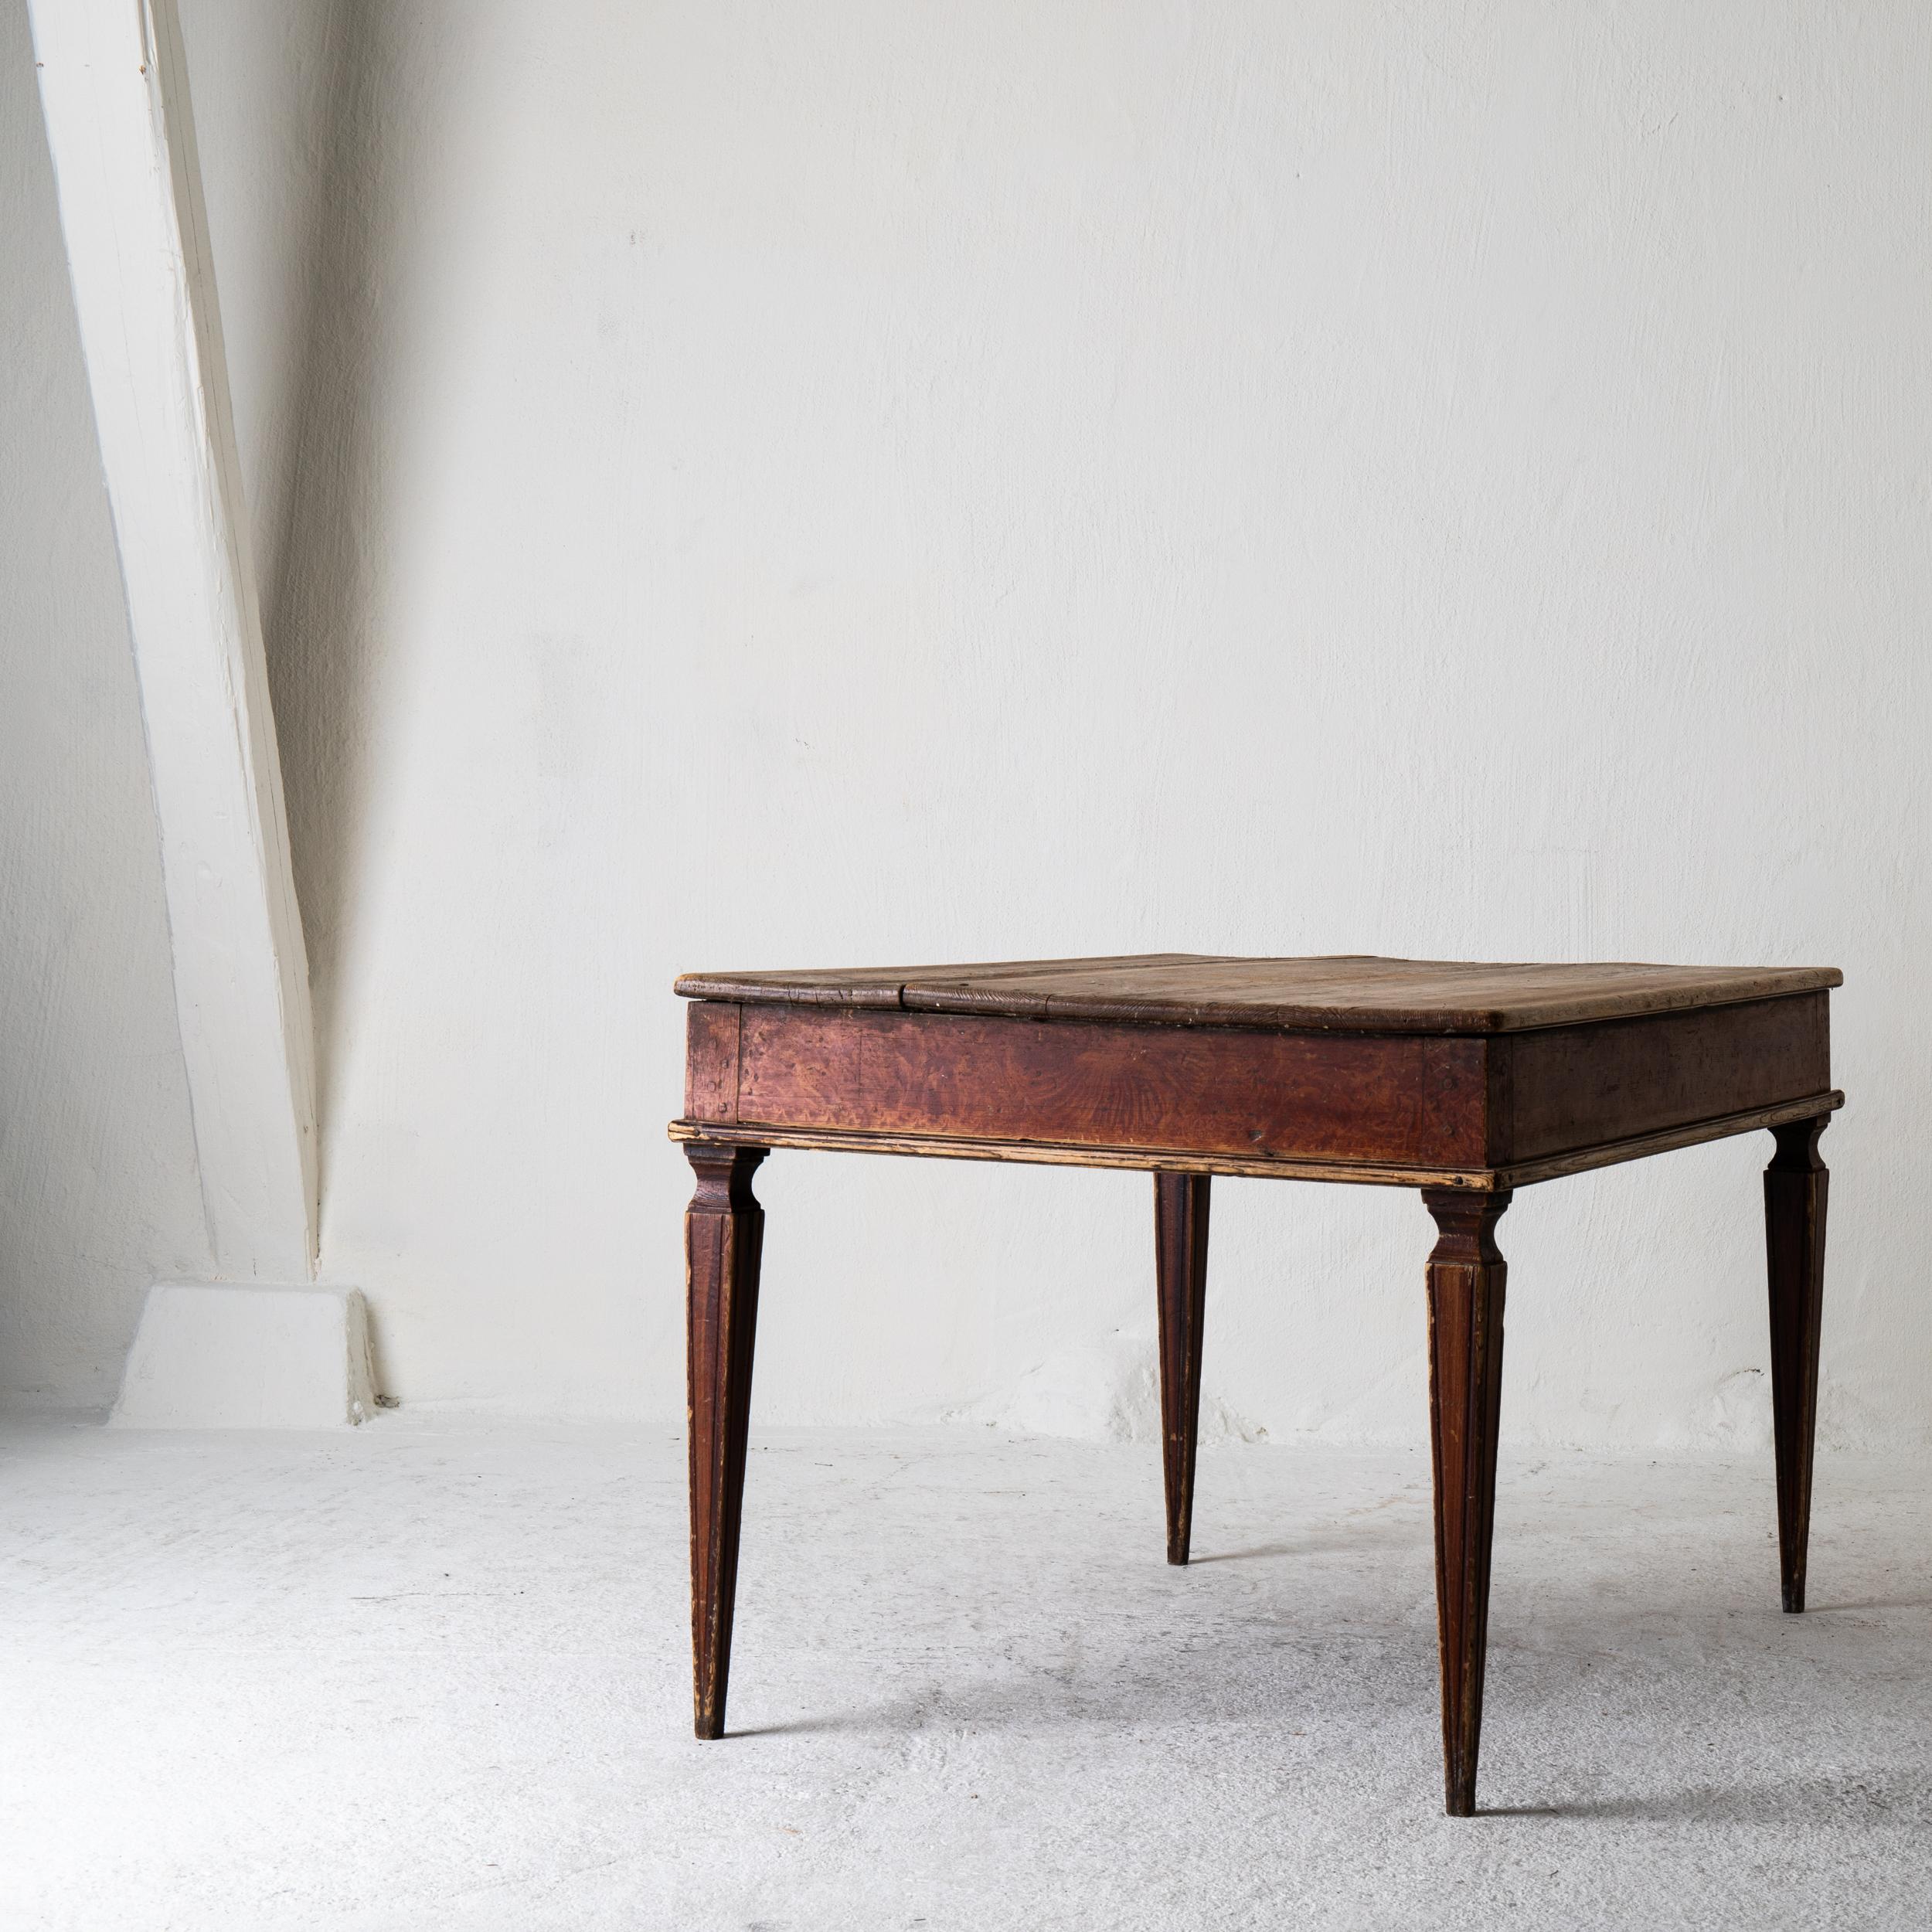 Table Swedish Gustavian 18th century original paint Sweden. A side table made during the 18th century in Sweden. Original reddish finish and paint. Tapered and channeled legs.

  